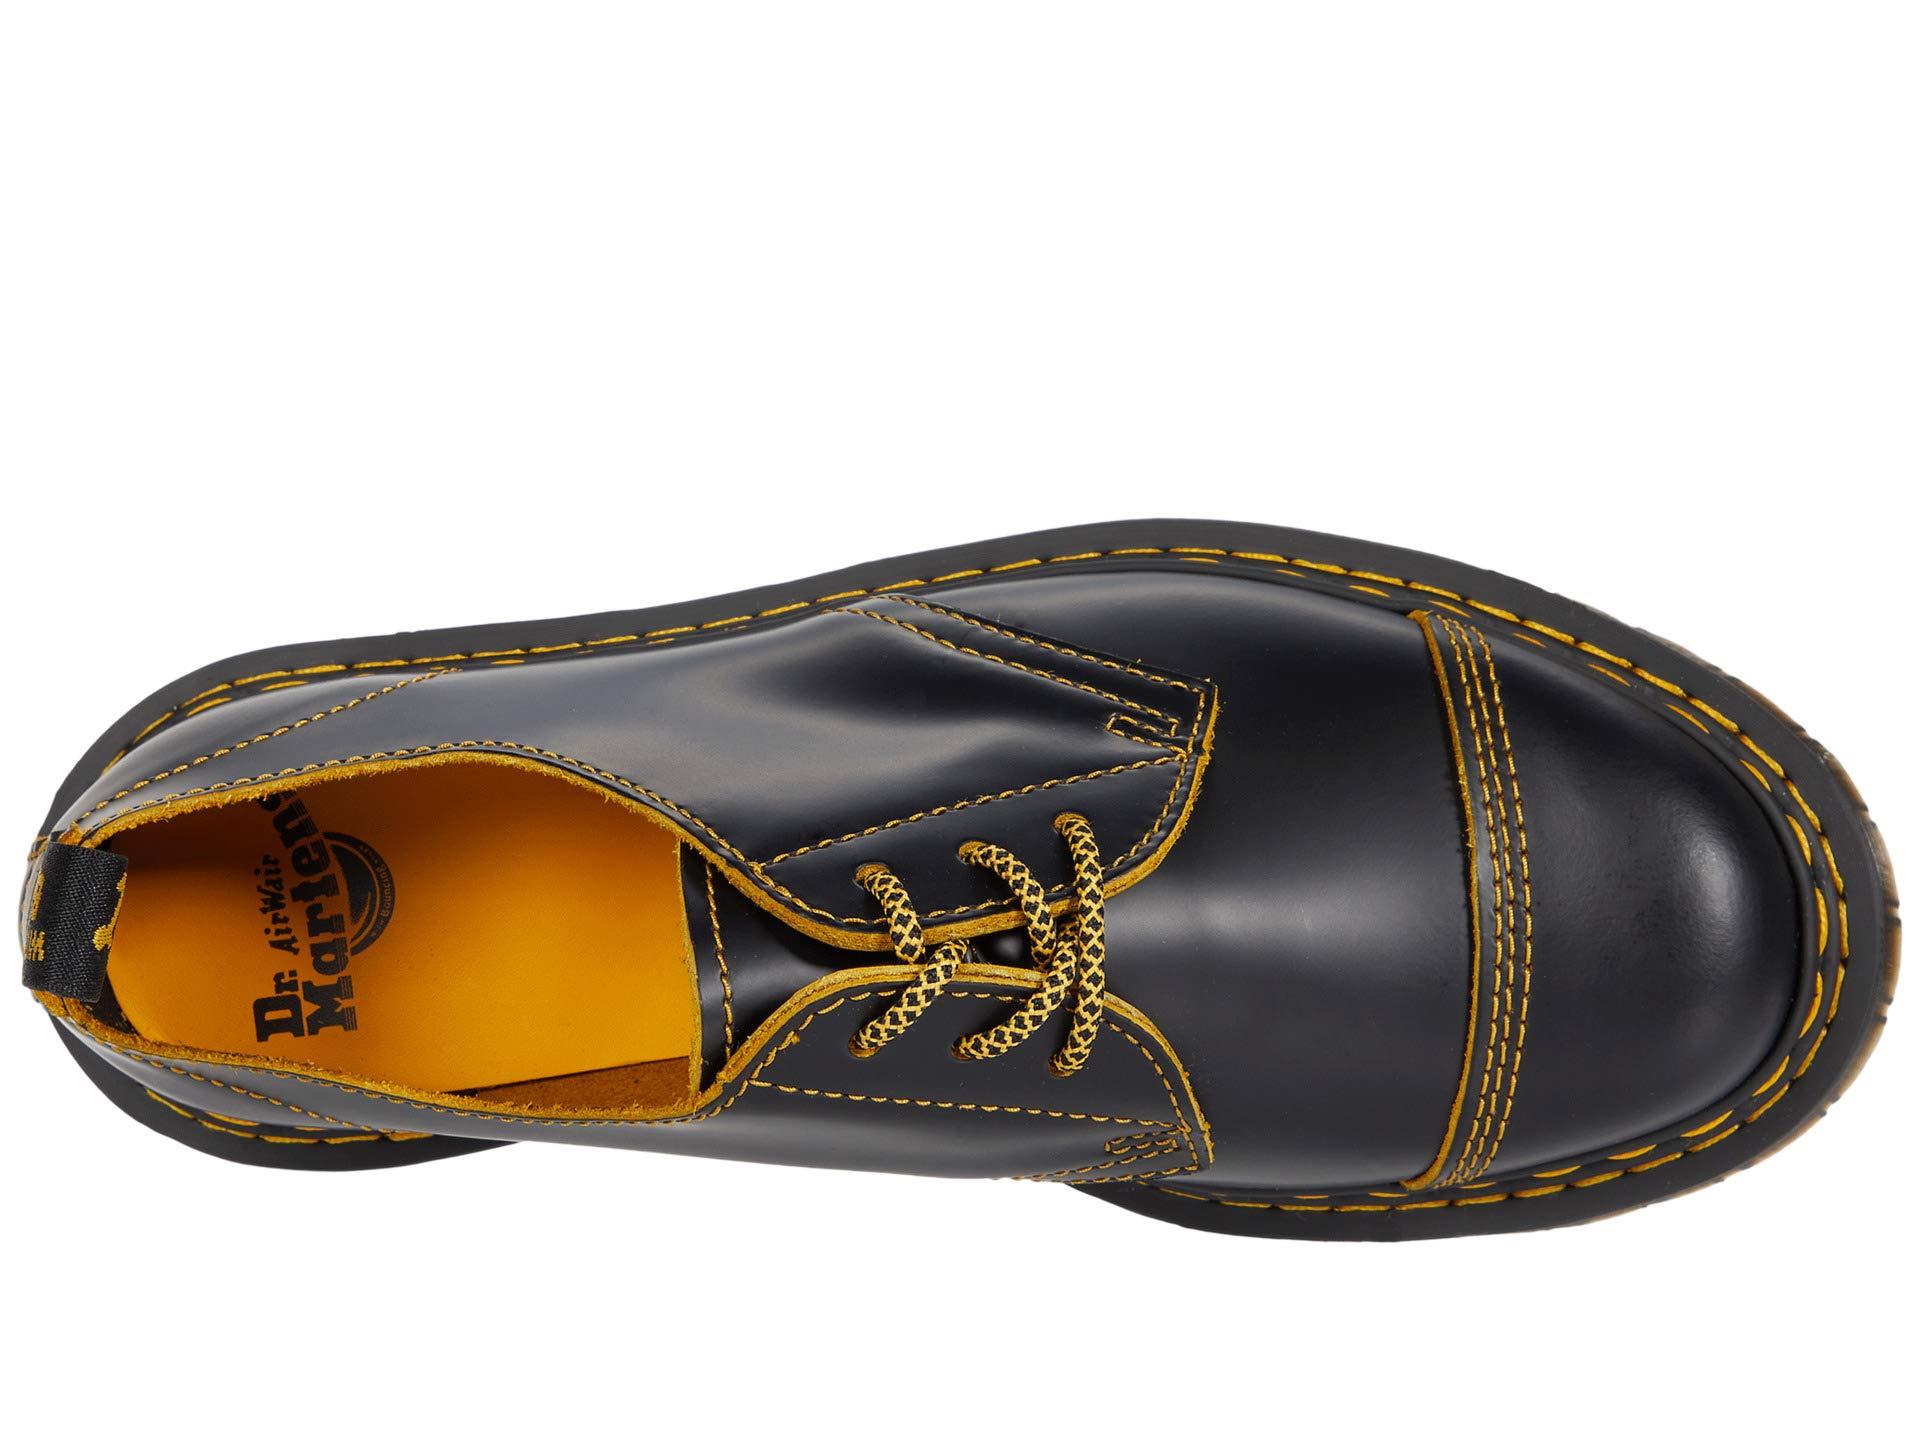 Dr. Martens 1461 Bex Double Stitch in Black | Lyst